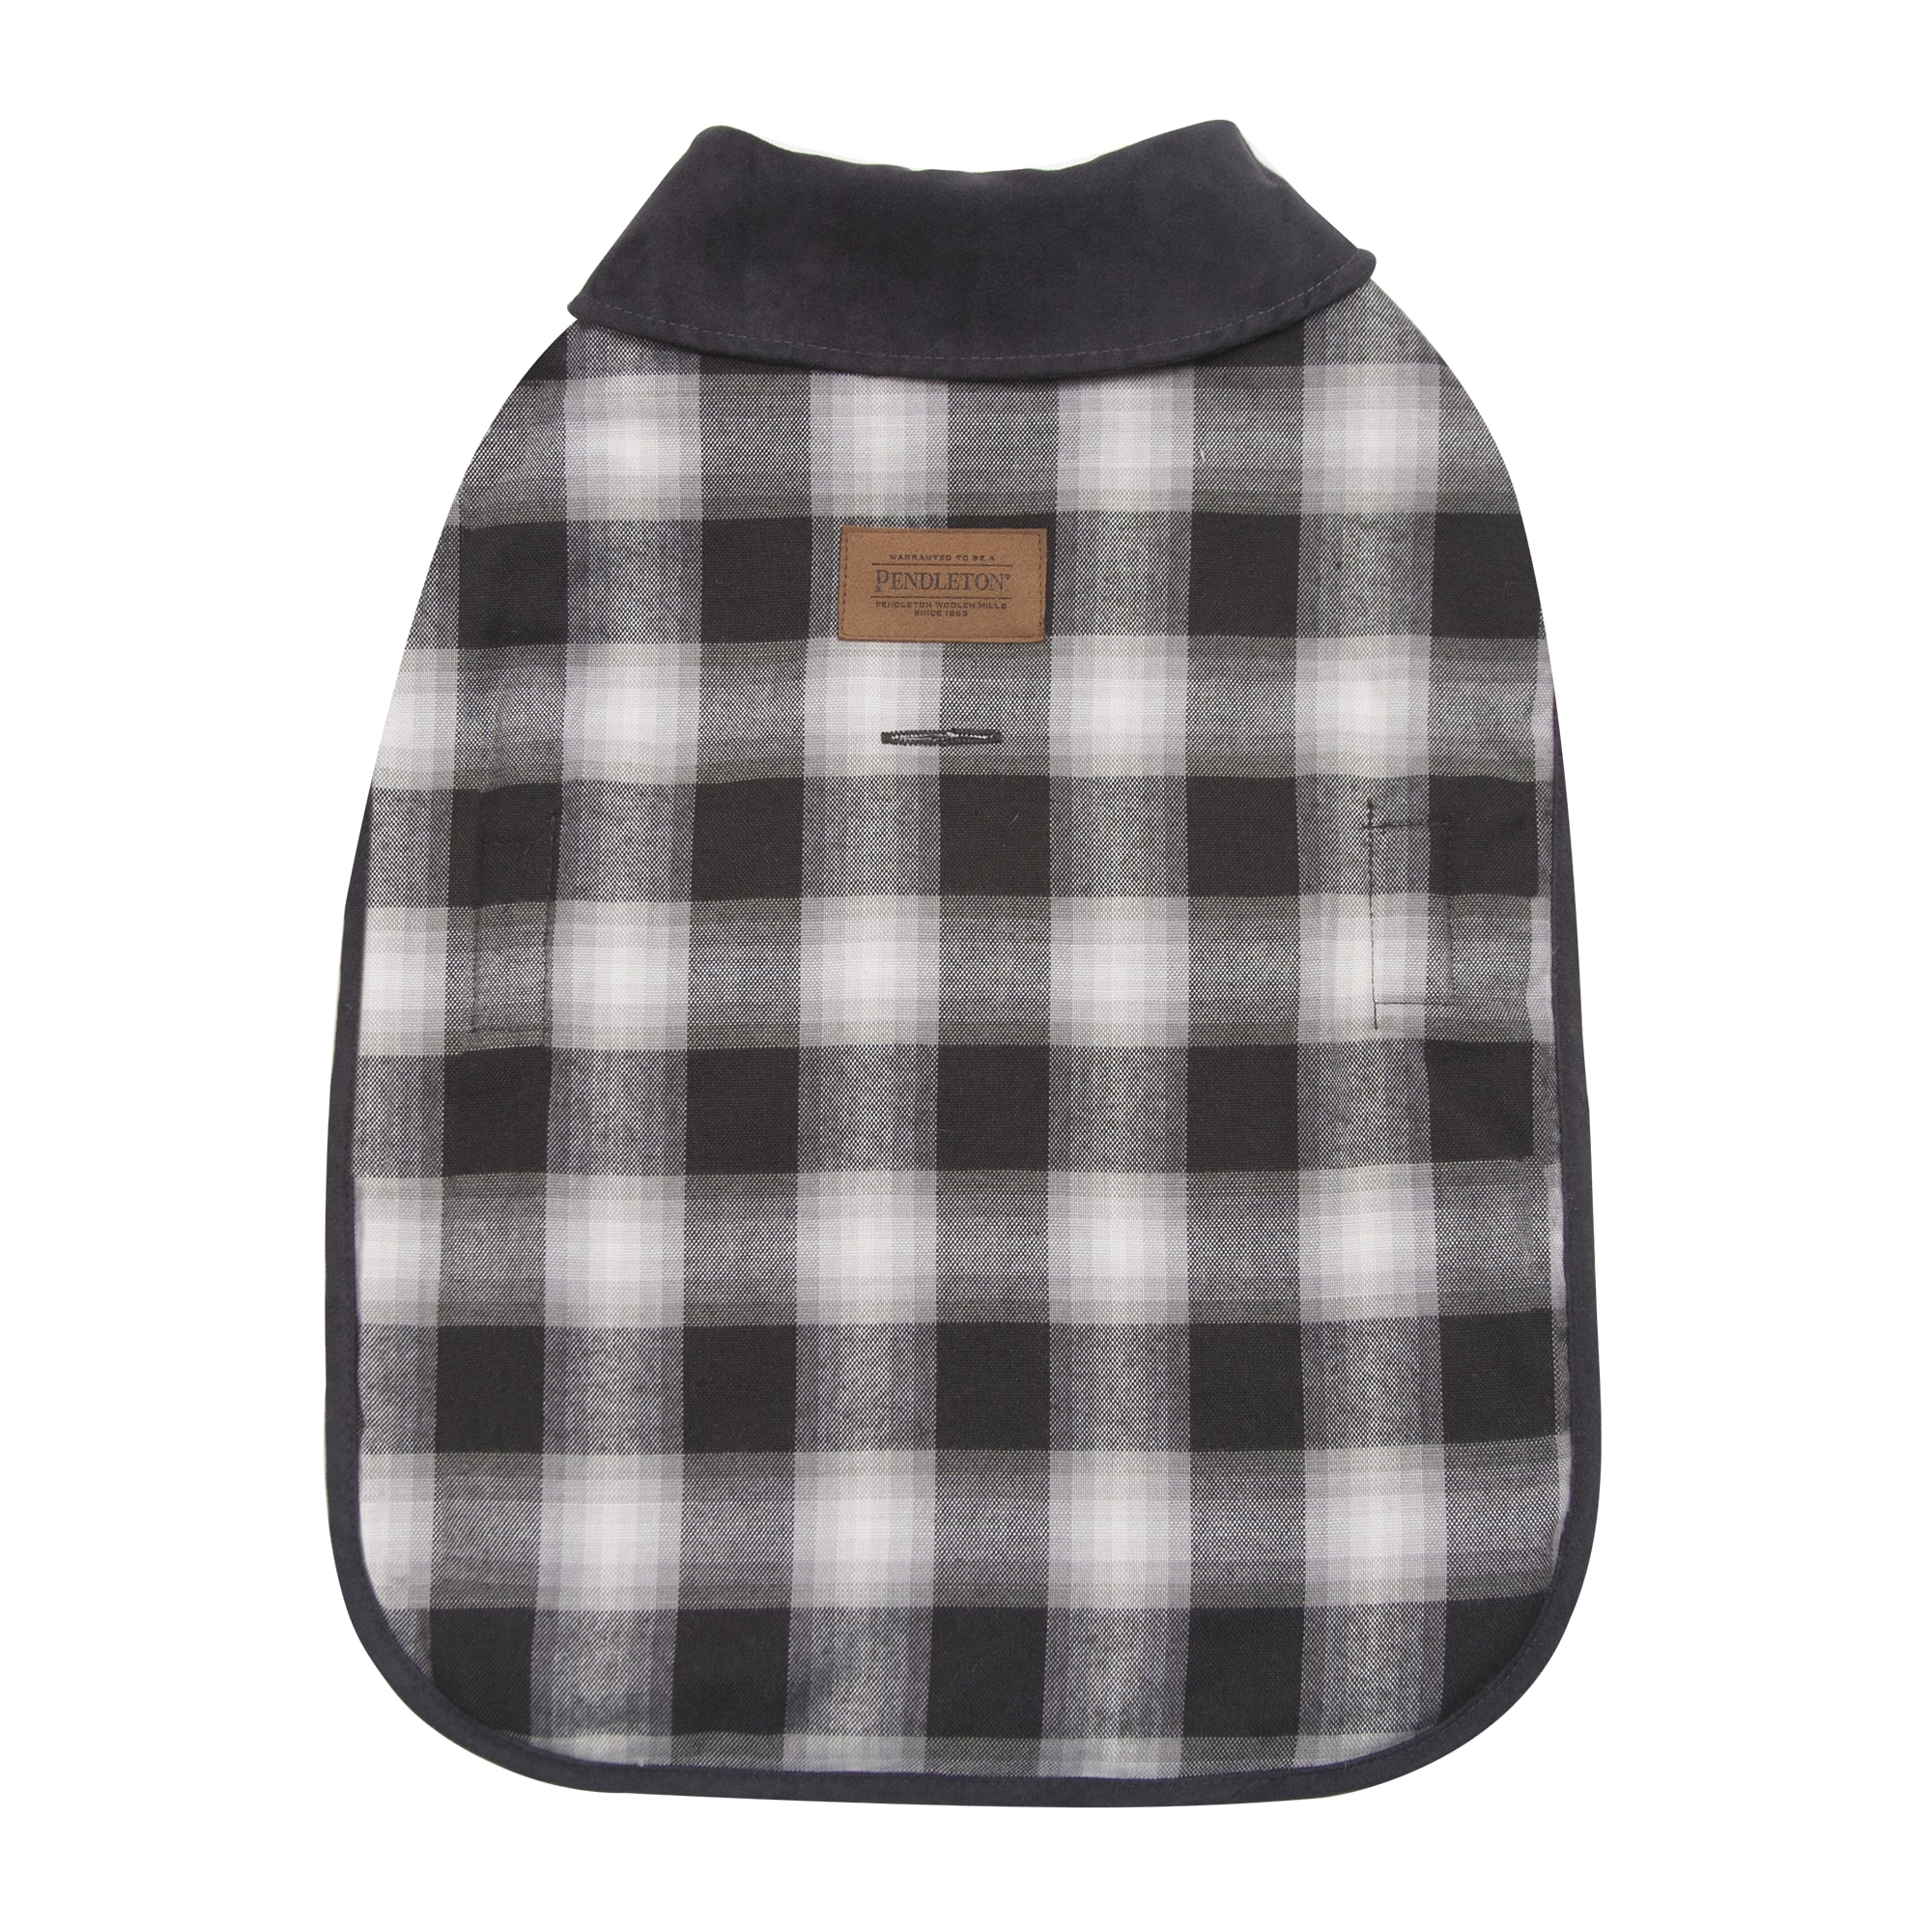 Photos - Dog Food Pendleton Charcoal Ombre Plaid Dog Coat, Small, Black 0PP3002-CH 